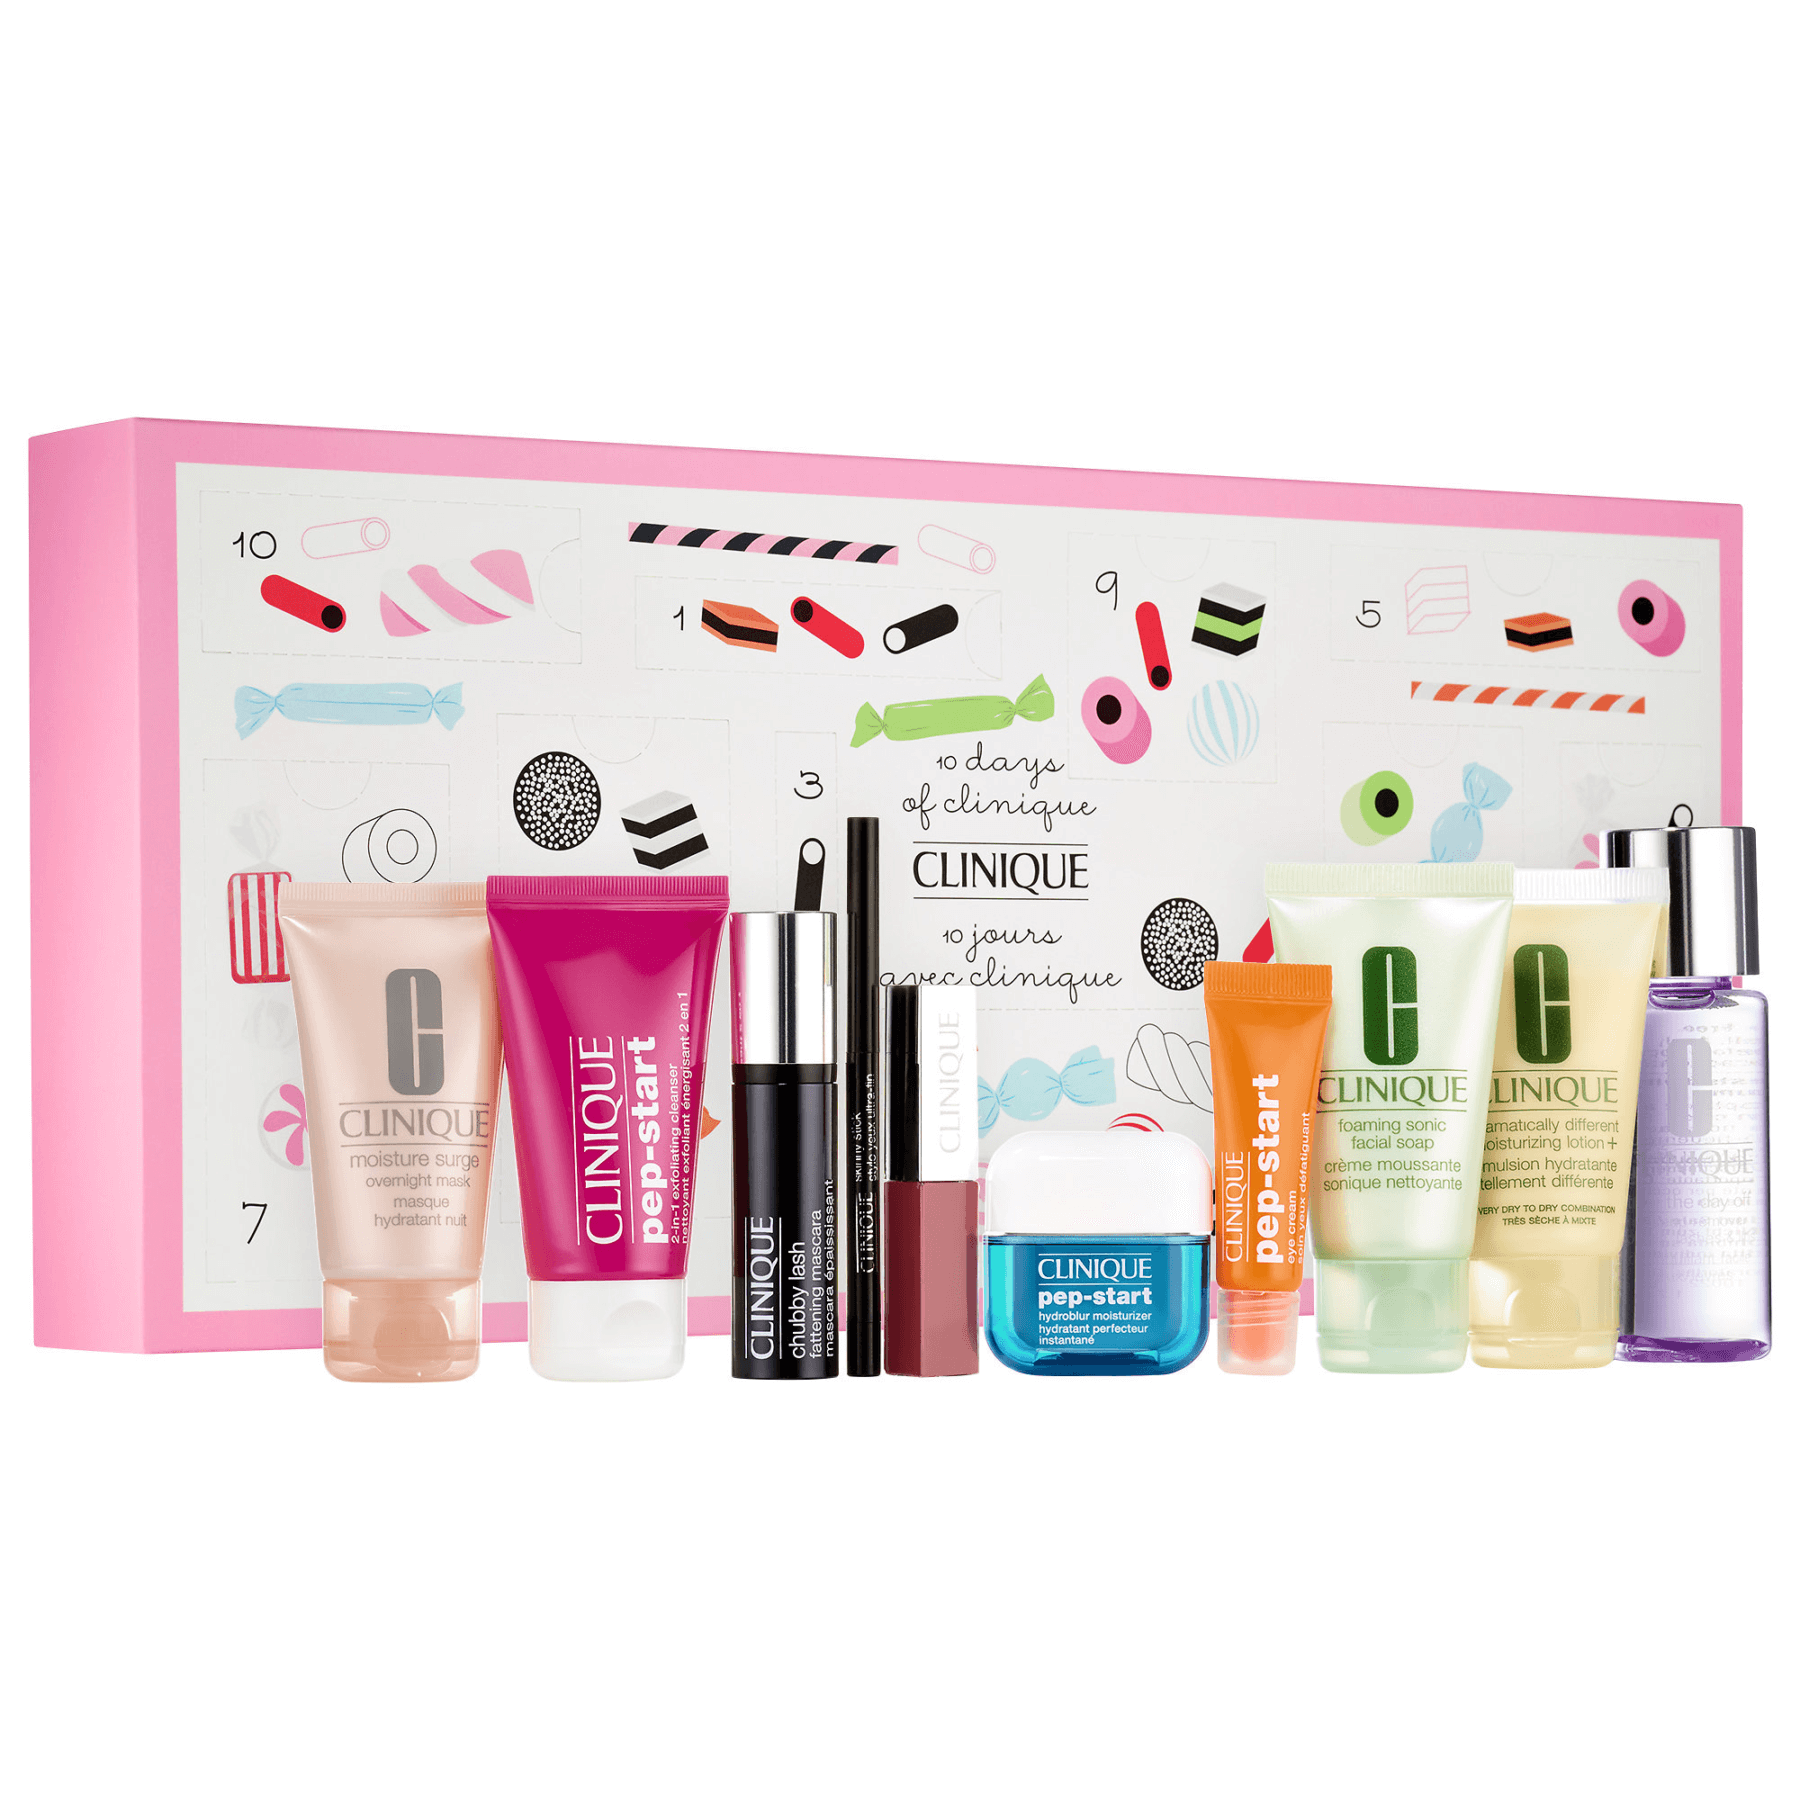 royalty kern afwijzing 10 Days of Clinique Beauty Advent Calendar Available Now! - Hello  Subscription